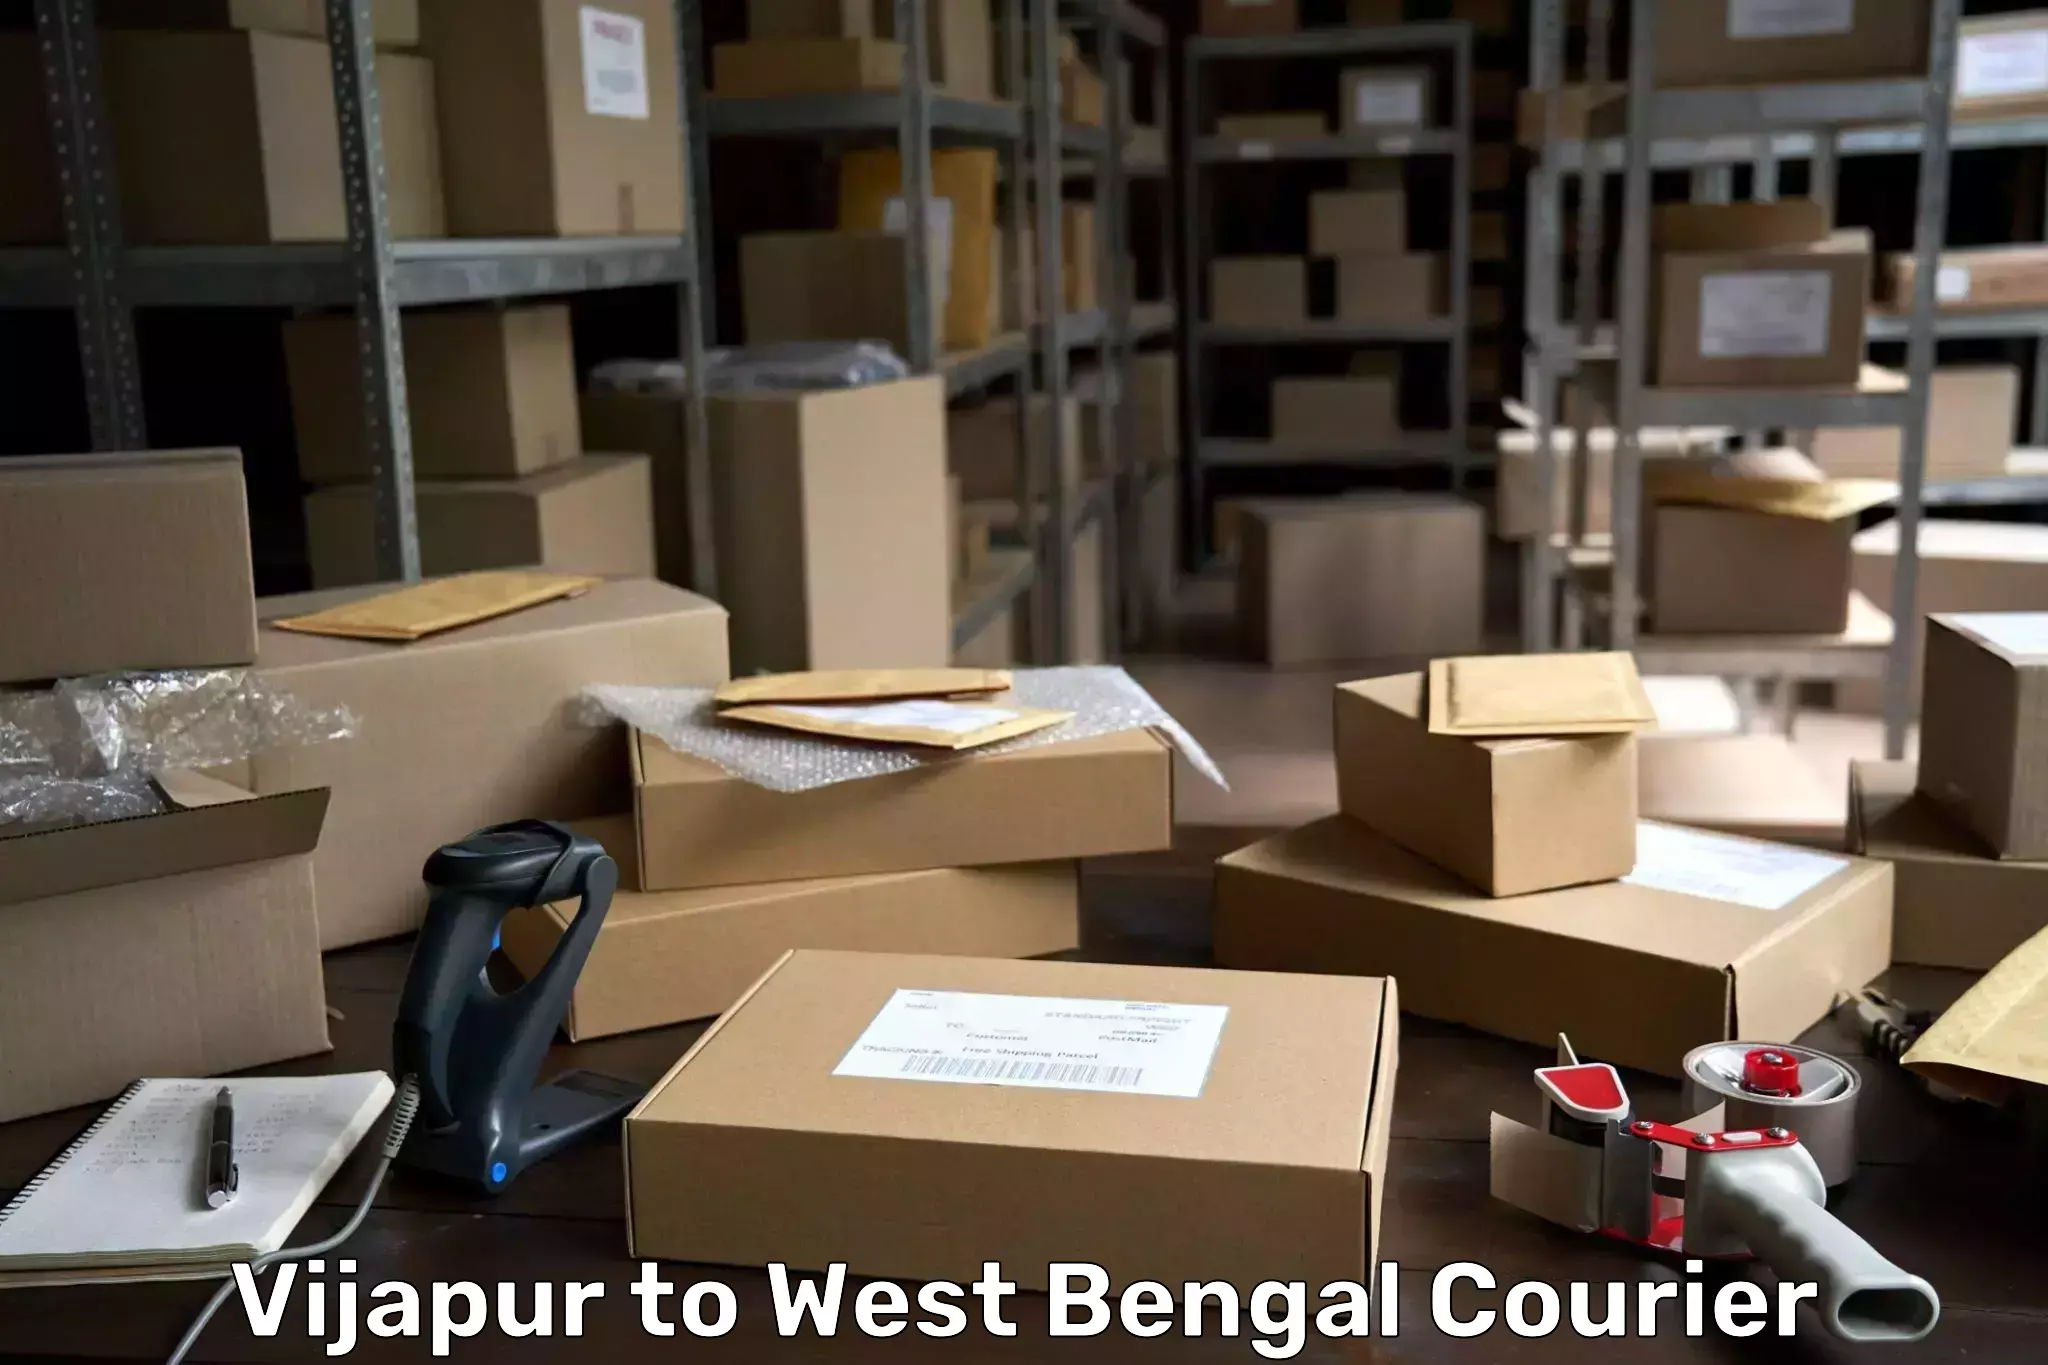 High-priority parcel service Vijapur to West Bengal